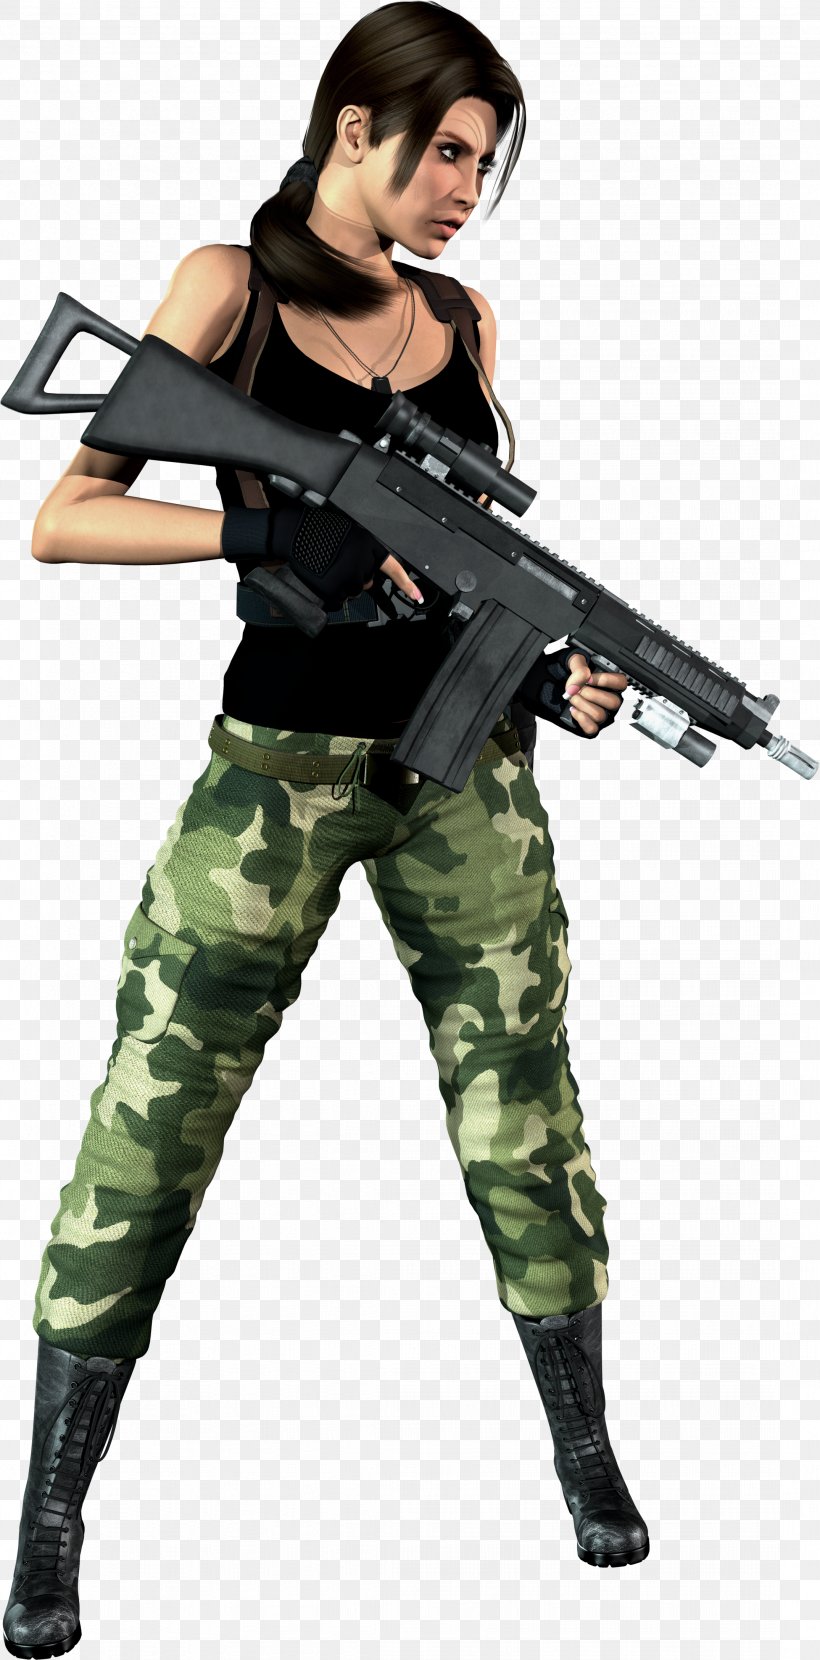 Airsoft Guns Soldier Army Firearm, PNG, 2149x4351px, Airsoft Guns, Air Gun, Airsoft, Airsoft Gun, Army Download Free